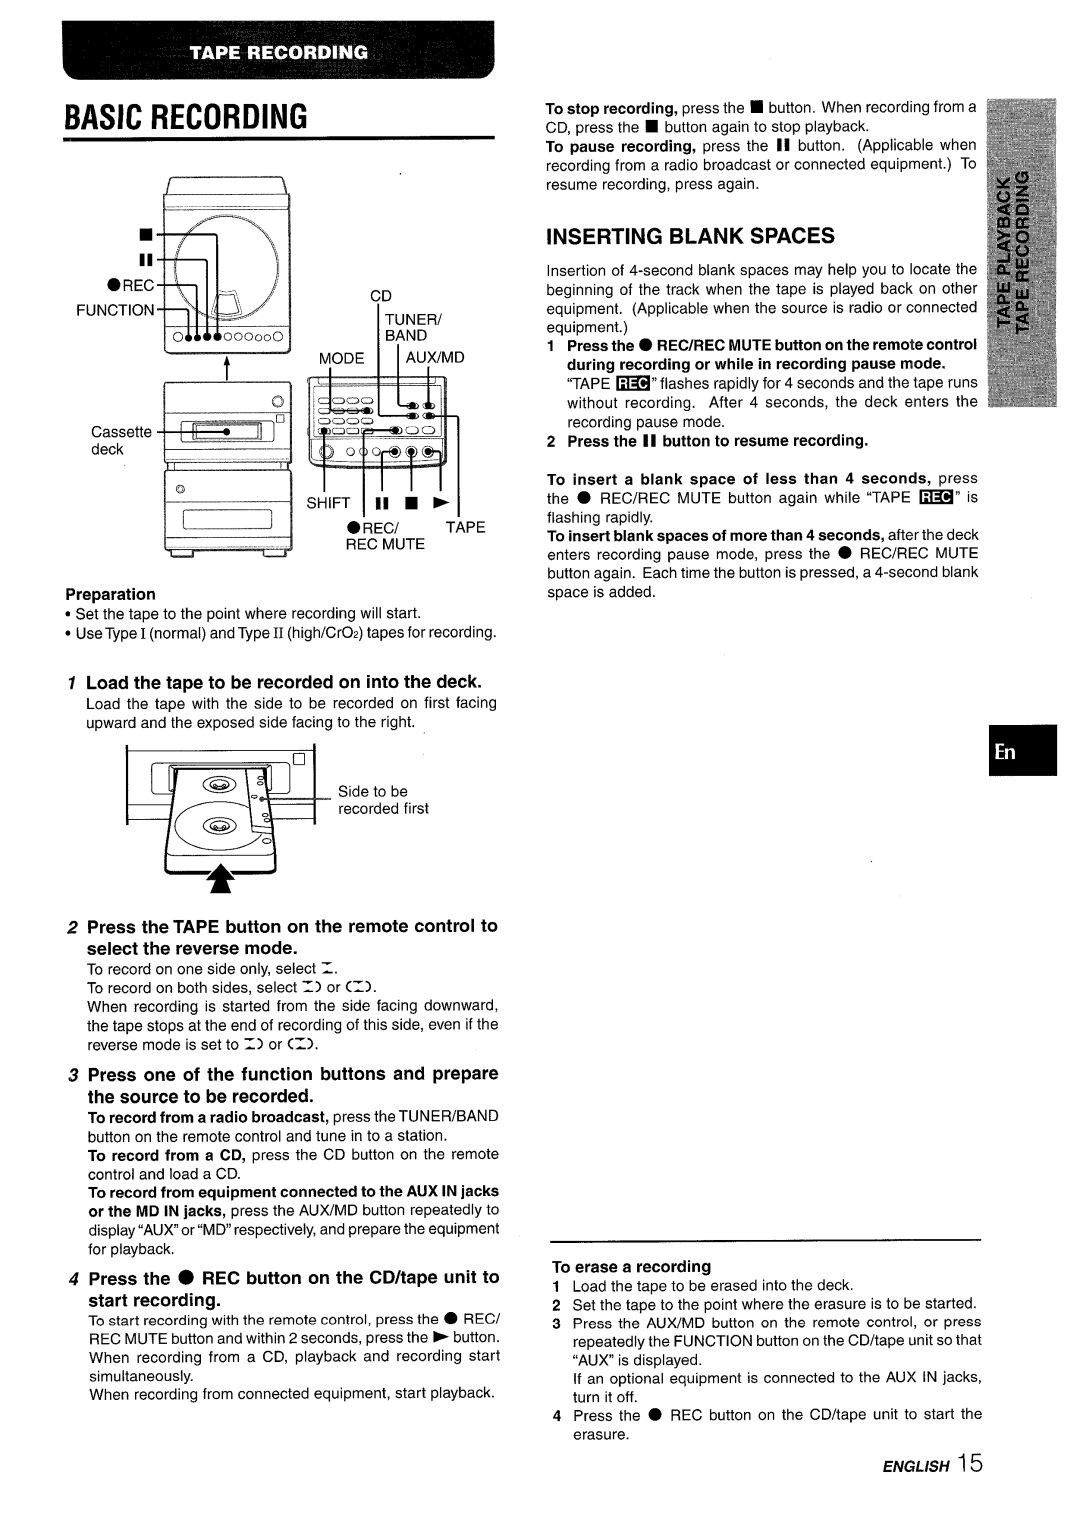 Aiwa XR-M88 manual Basic Recording, Inserting Blank Spaces, Load the tape to be recorded on into the deck, Preparation 